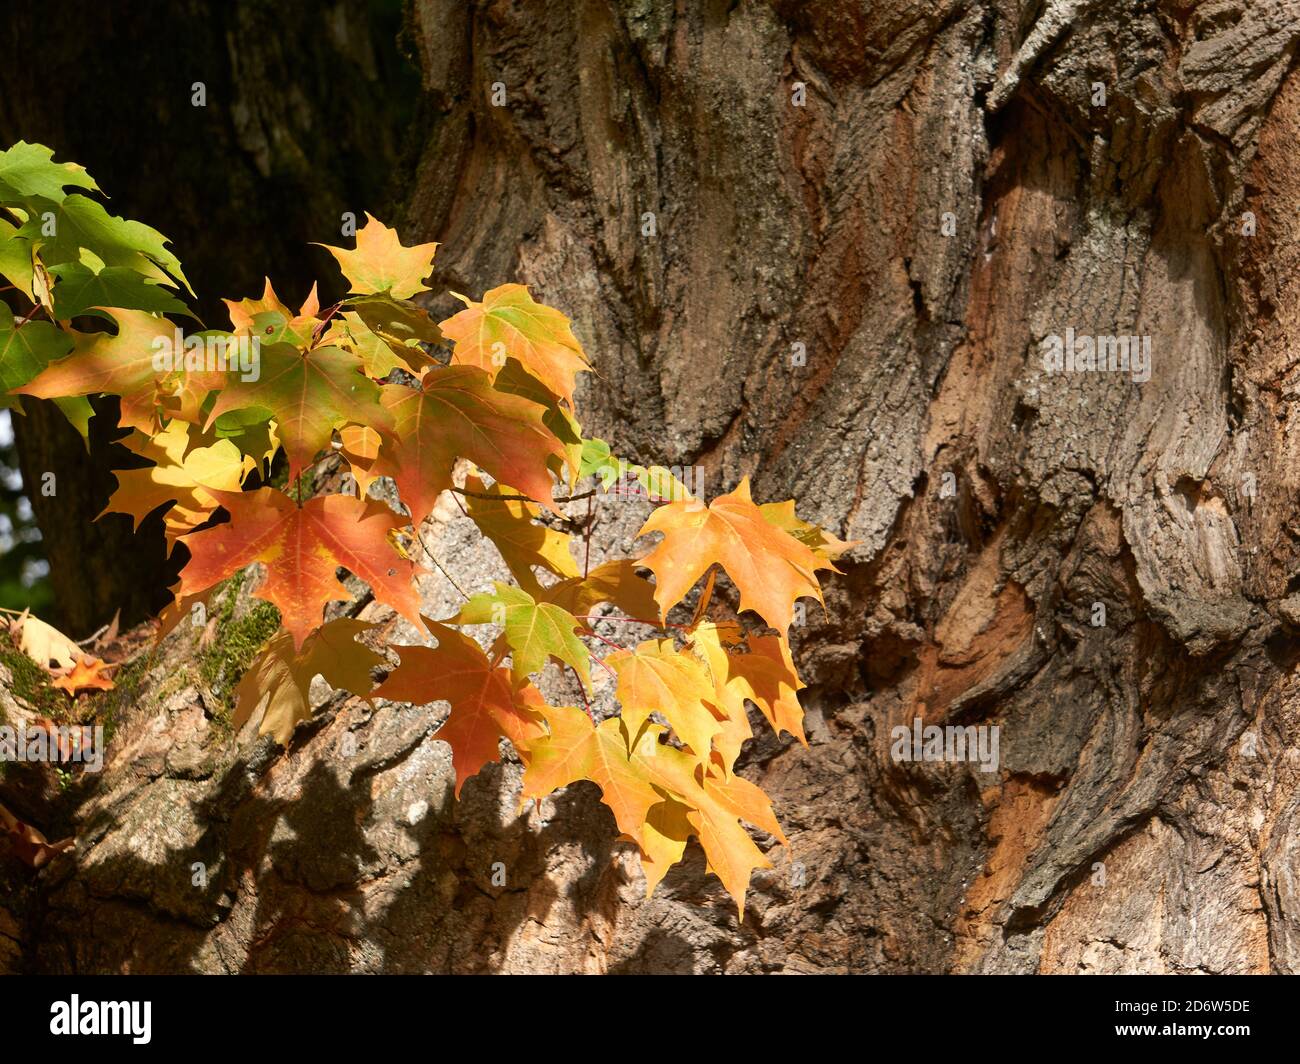 Branch of colorful red, yellow, and orange maple leaves with rough textured tree trunk in the background, Vancouver, BC, Canada Stock Photo